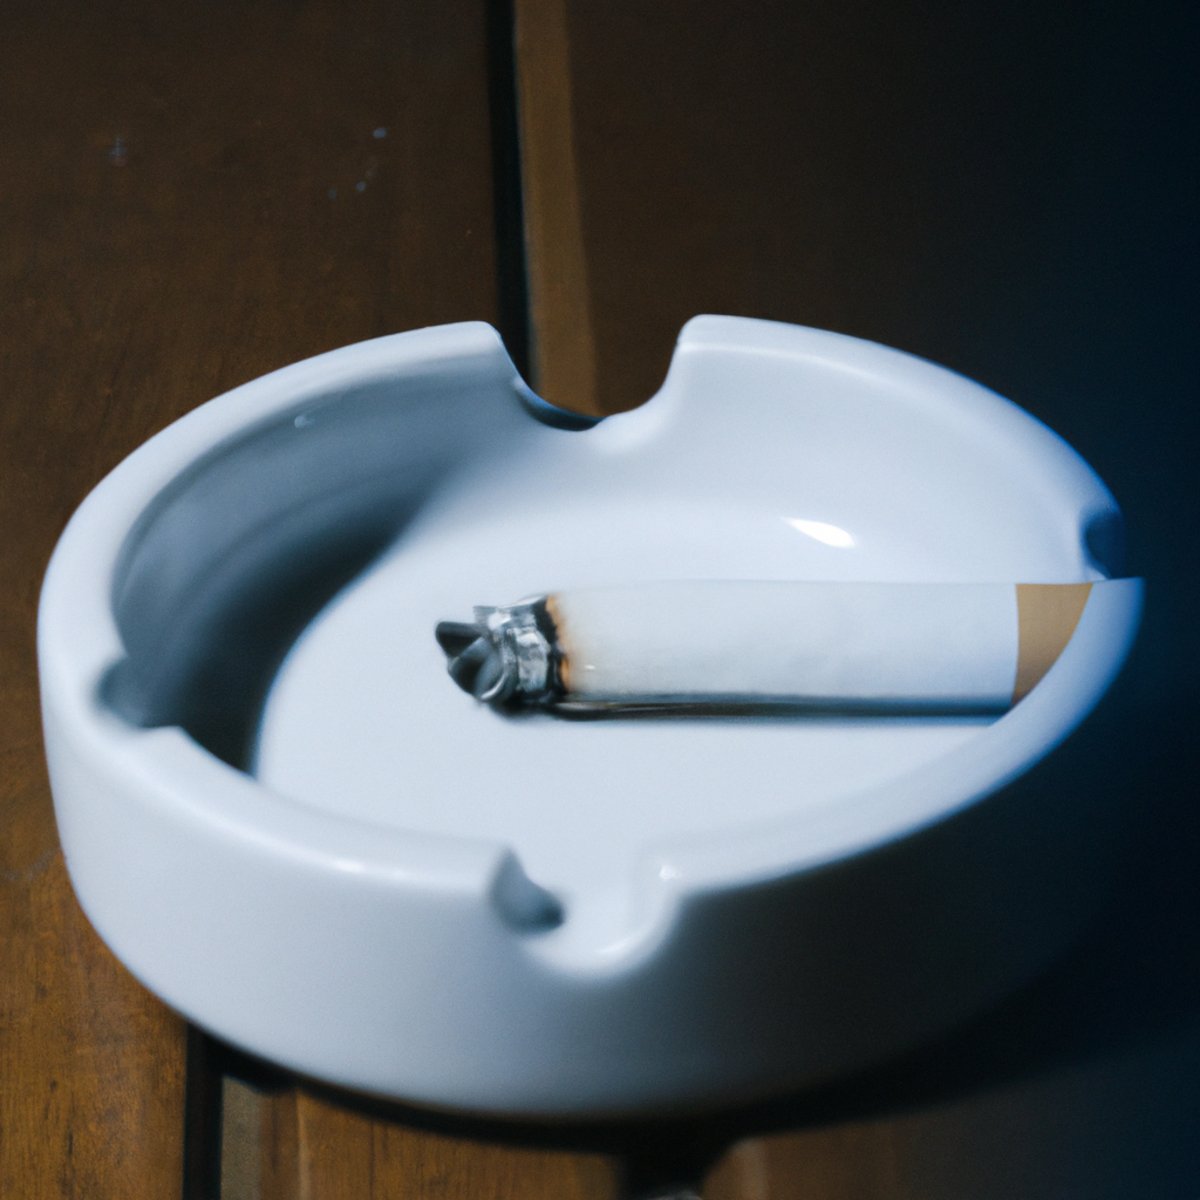 Close-up of cigarette on ashtray, showcasing brand logo and wisps of smoke, representing harmful effects on respiratory health - Diffuse Panbronchiolitis